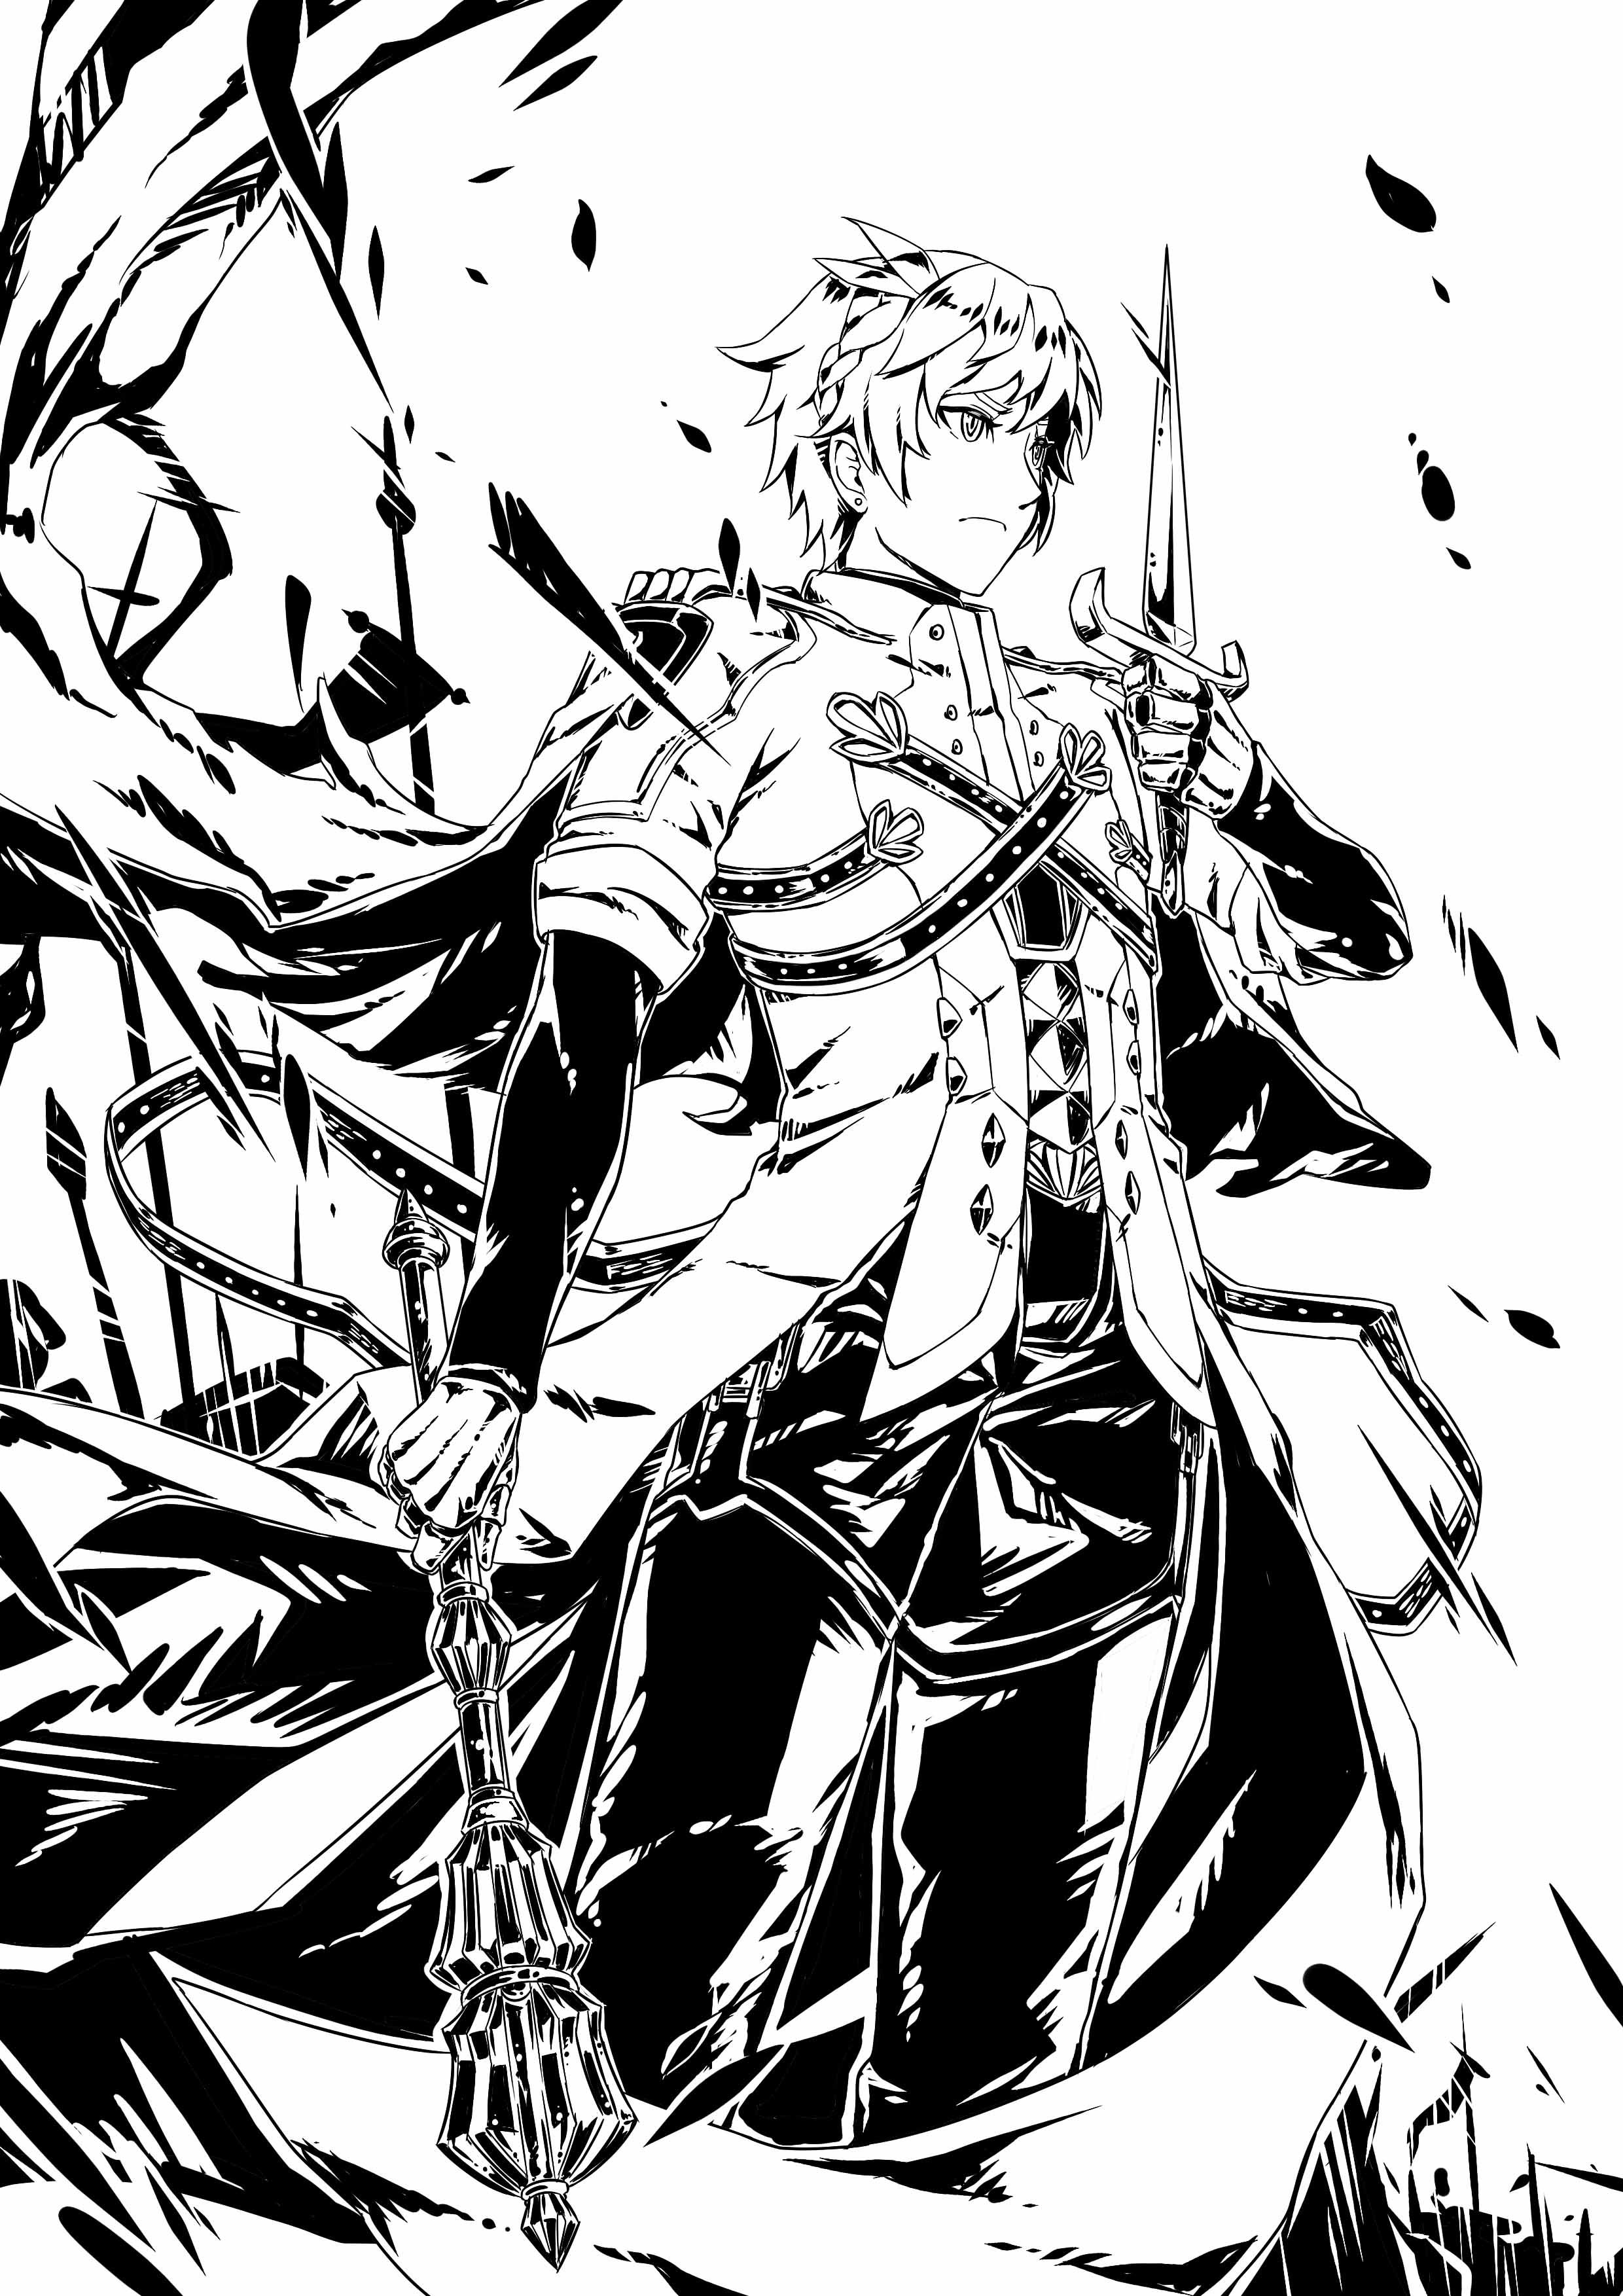 Draw A Cool Black And White Anime Manga Style By Keroblack Fiverr